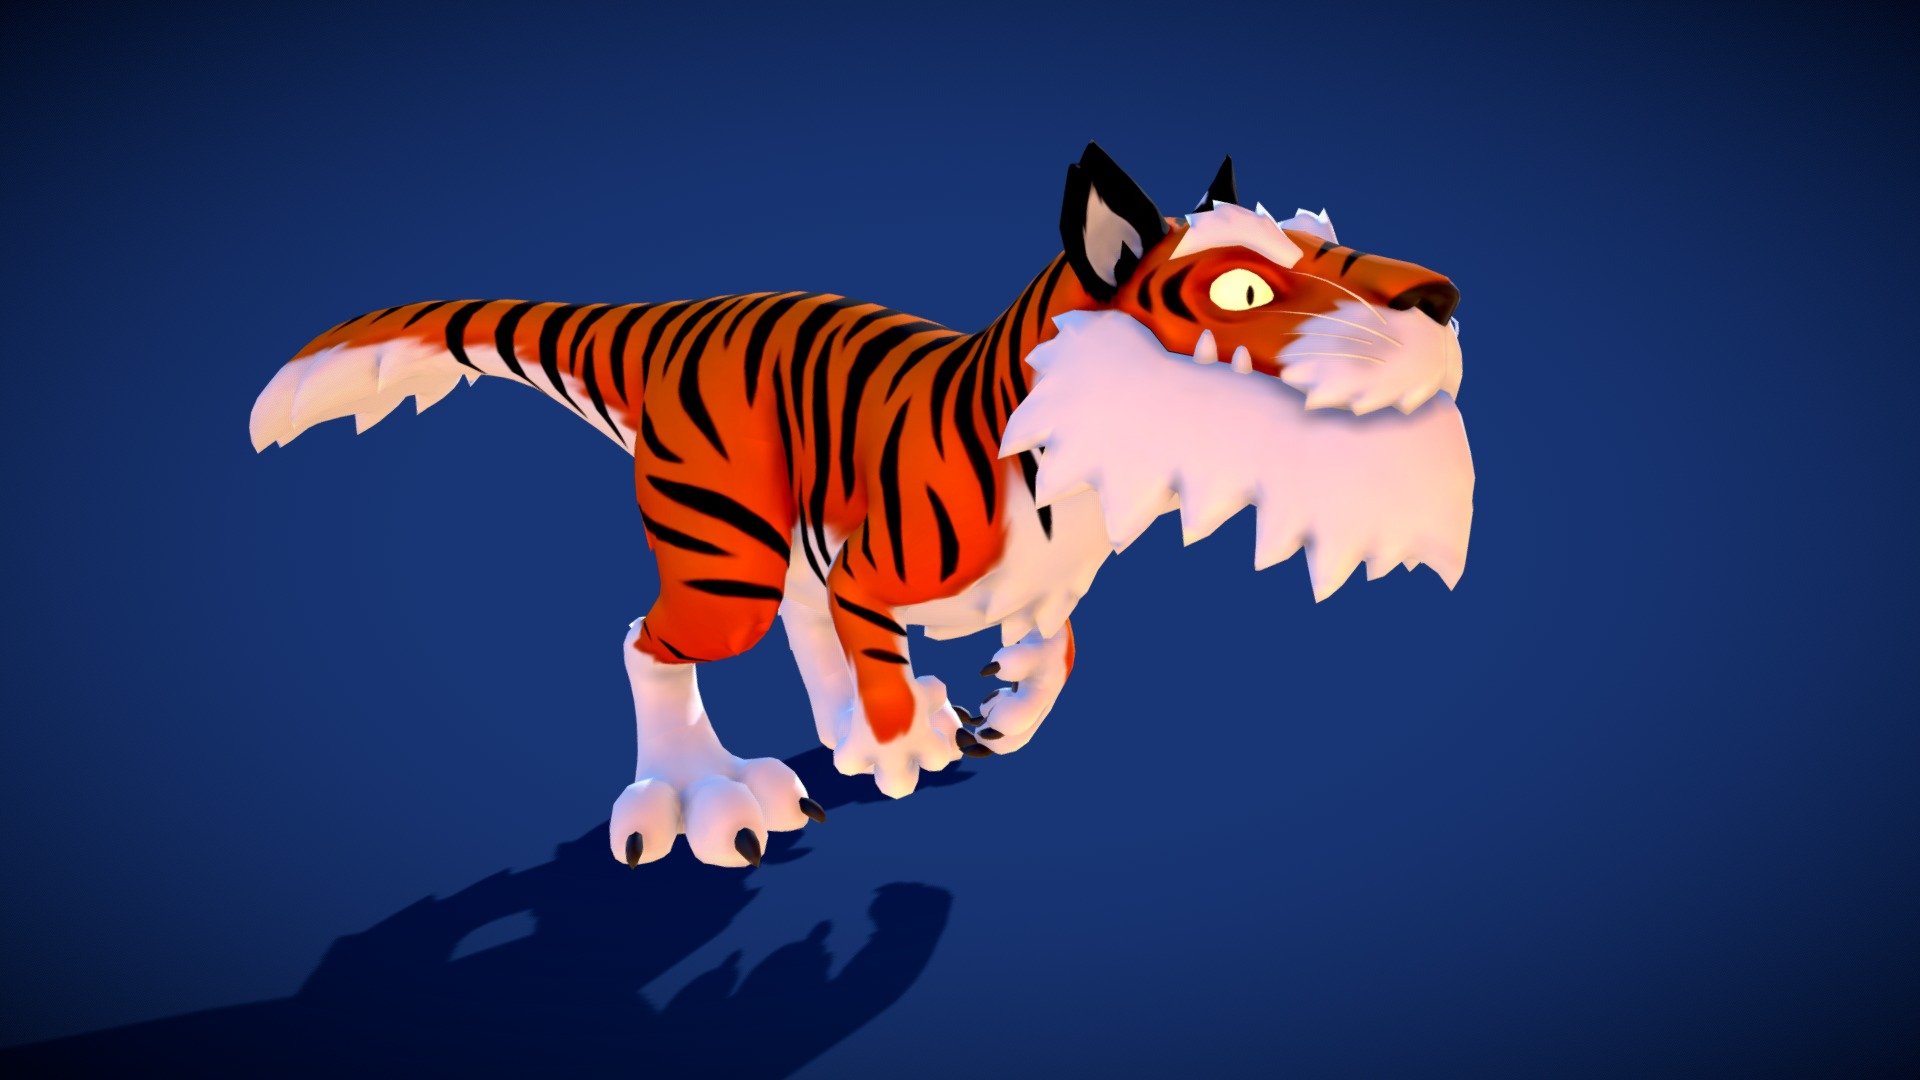 My personal 3D and concept project.

Its been quite long time since I can pull out something on here. But its still fun project I was working on.


Created in ZBrush and Maya.
Animation in Maya.
Texture in Photoshop and 3DCoat.
Additional tool with Marmoset Toolbag.

Concept and modeling by me.


 - Tiger Rex - 3D model by Thelombax51 3d model